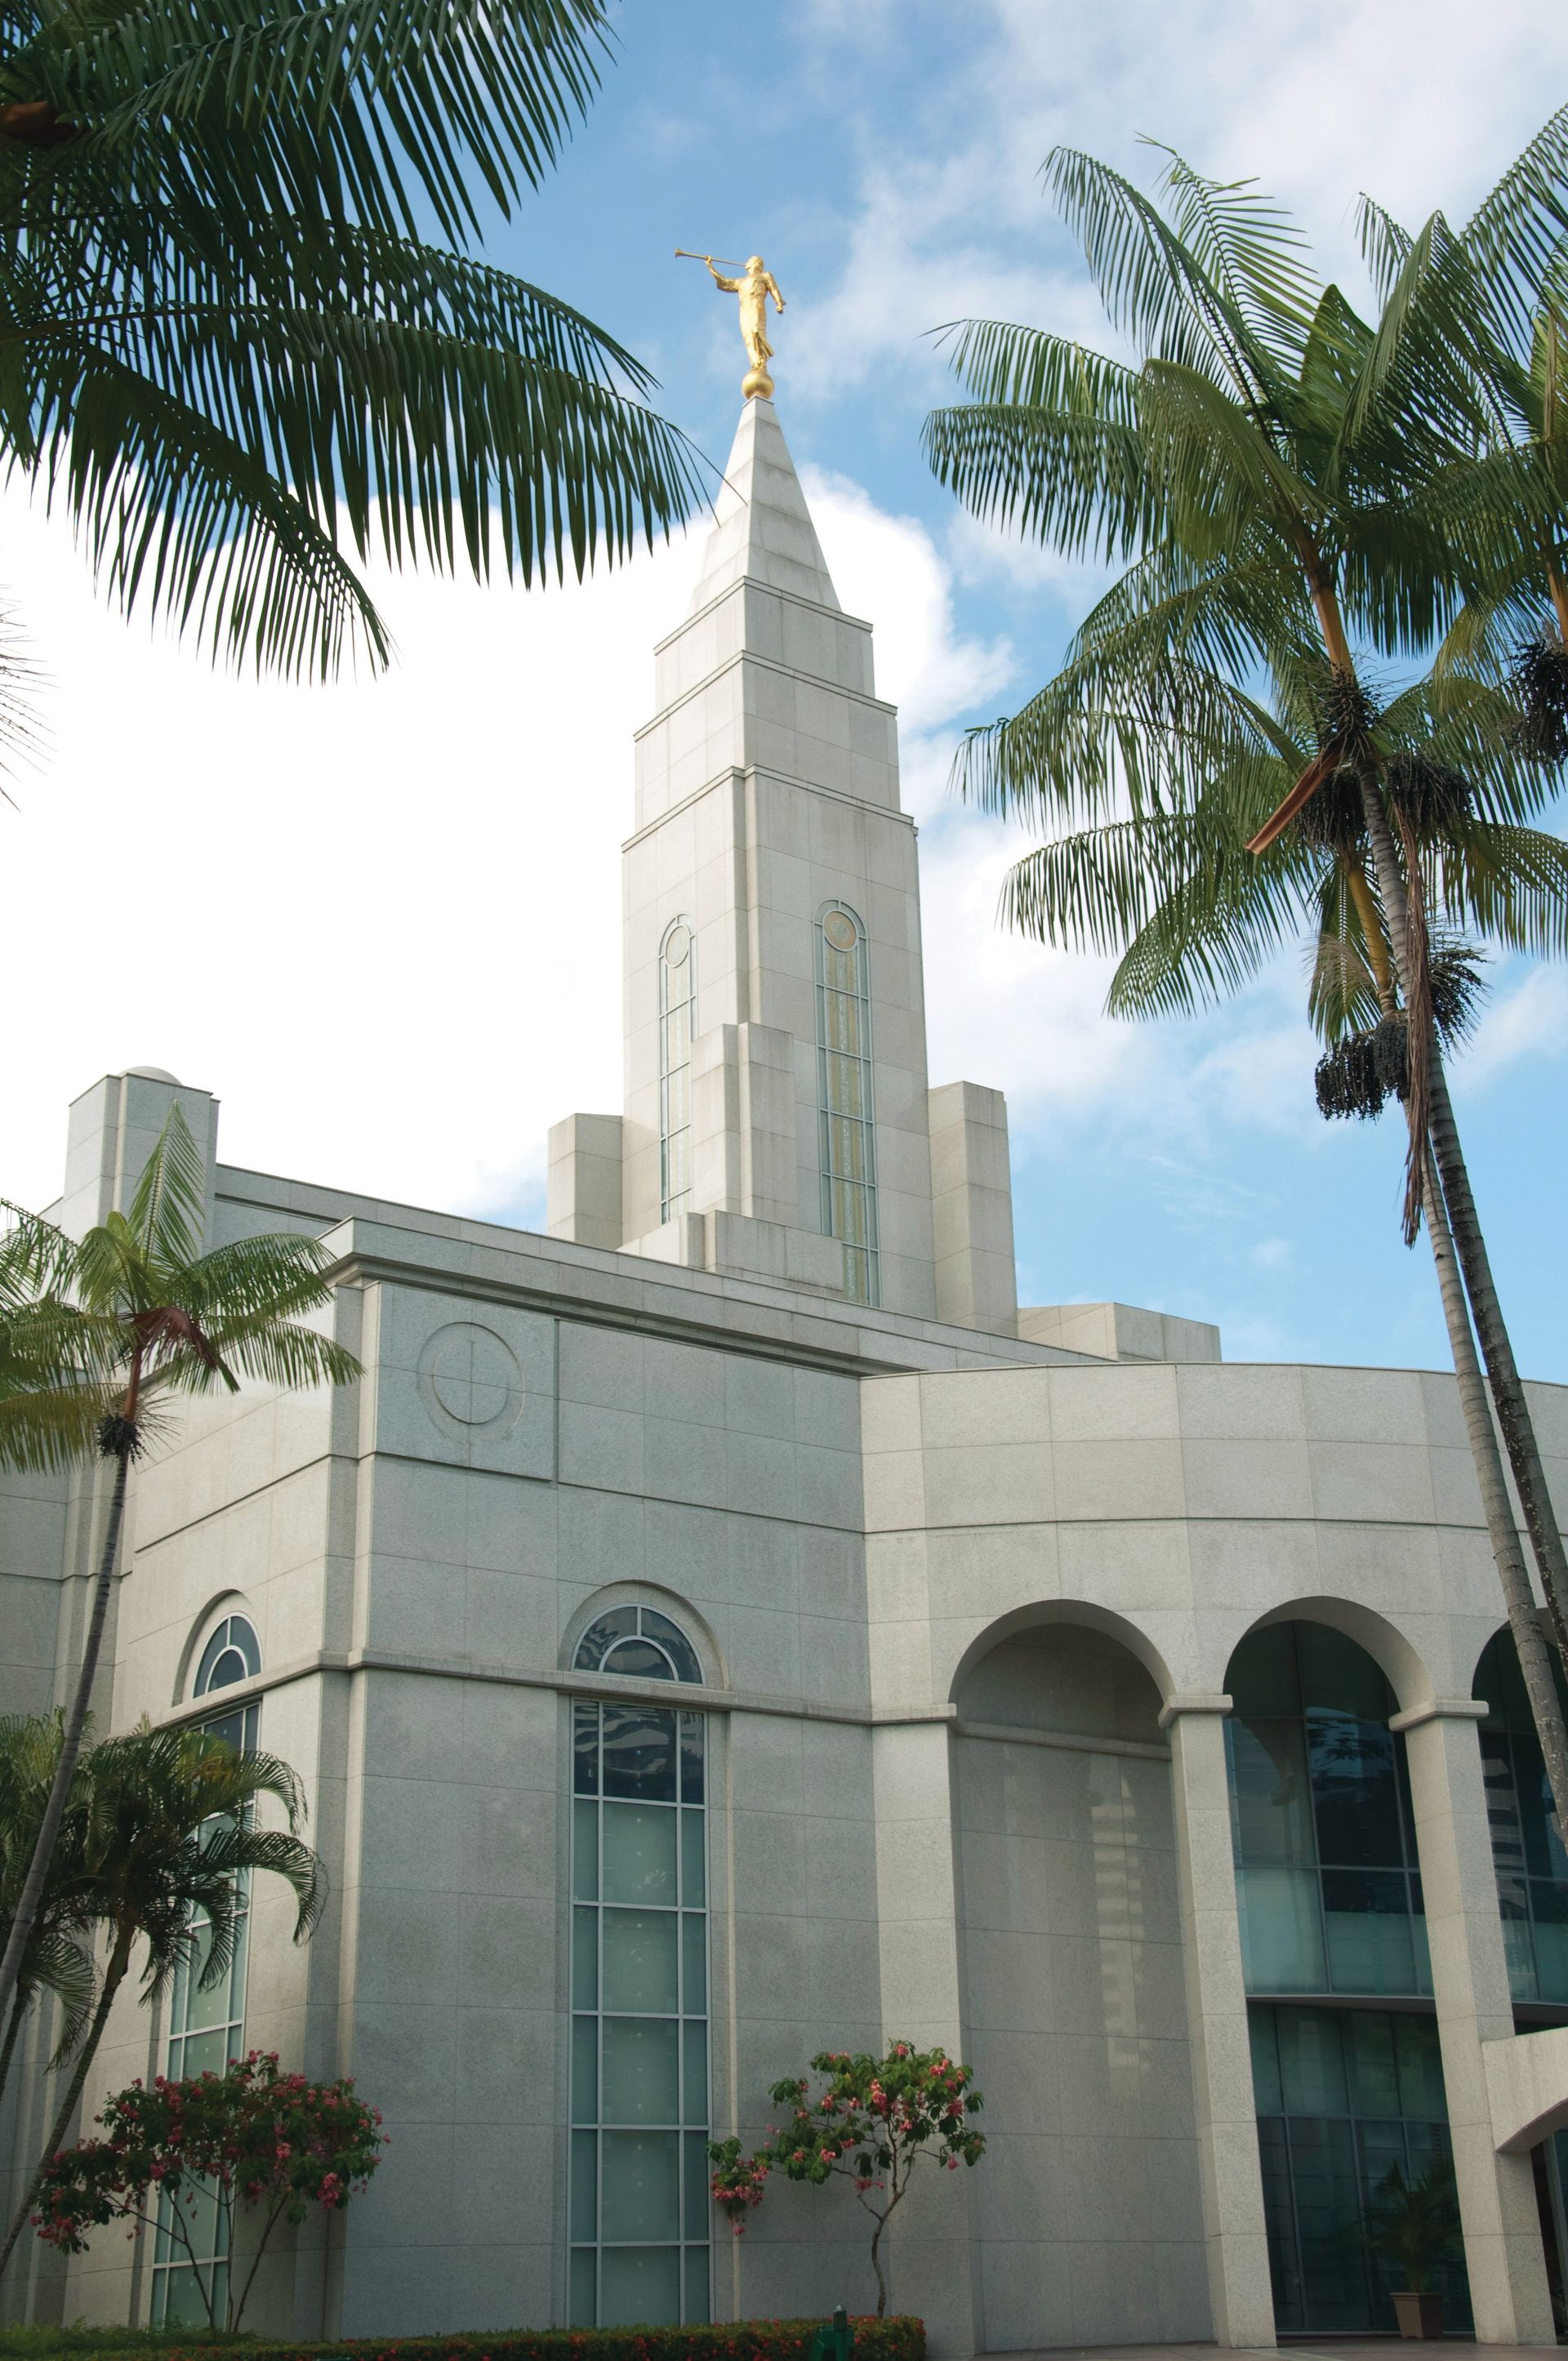 The Recife Brazil Temple entrance, including the spire and scenery.